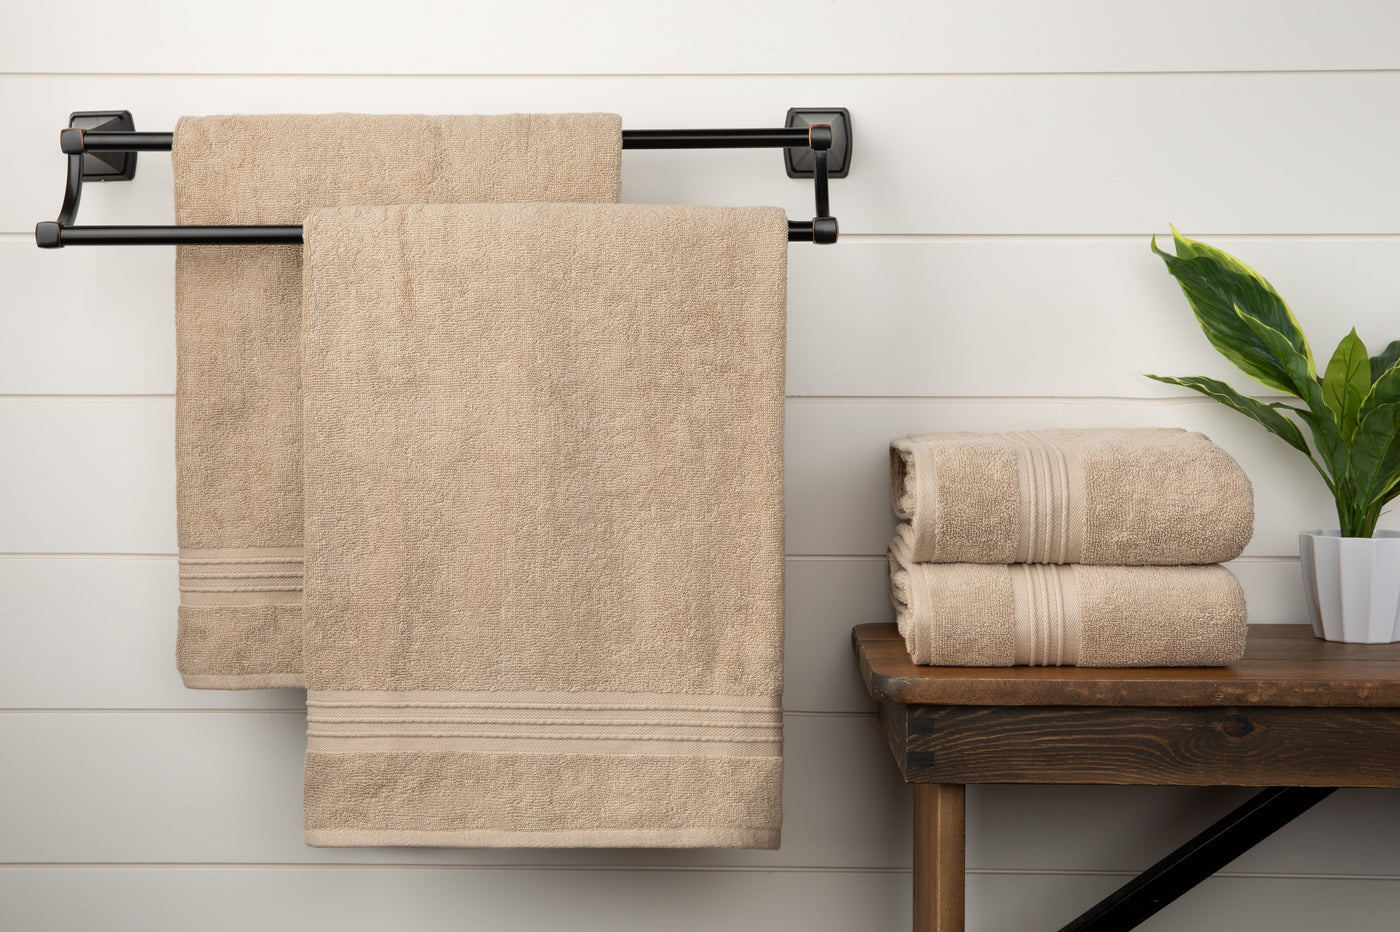 Introducing: Soft Terry Bath Towels